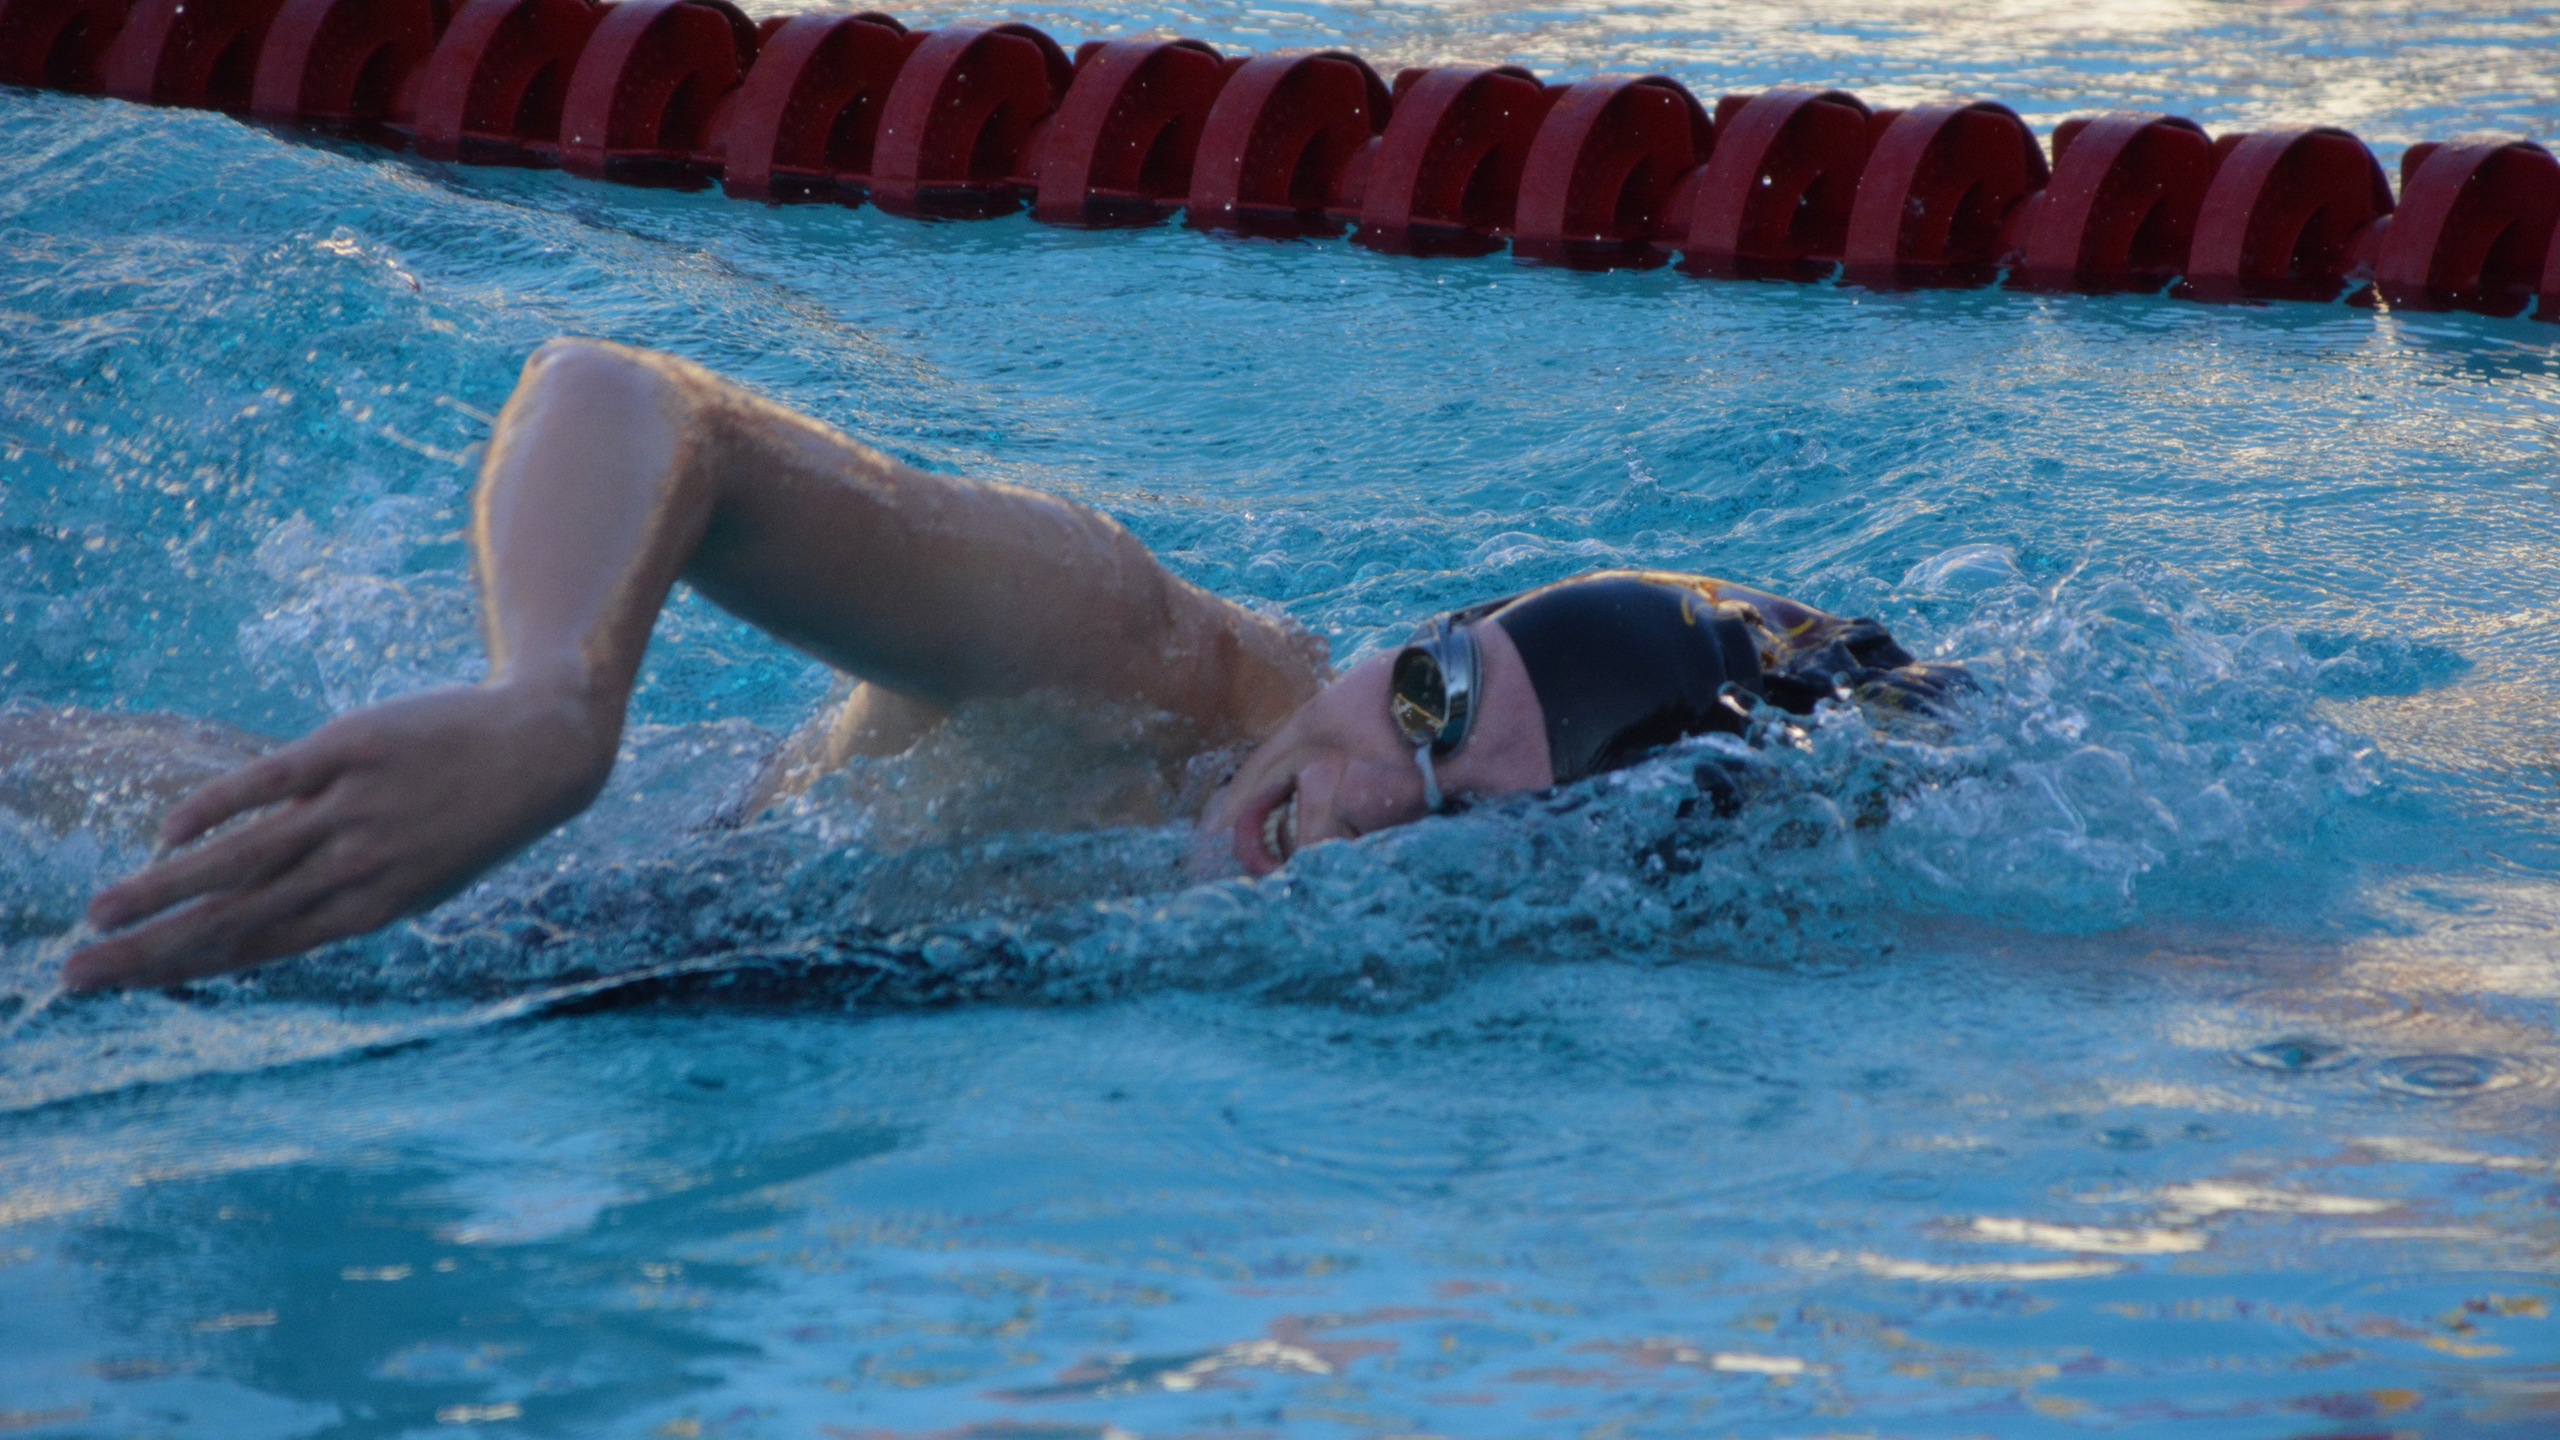 Katy Shaw earned a win in the 1000 free by 13 seconds.